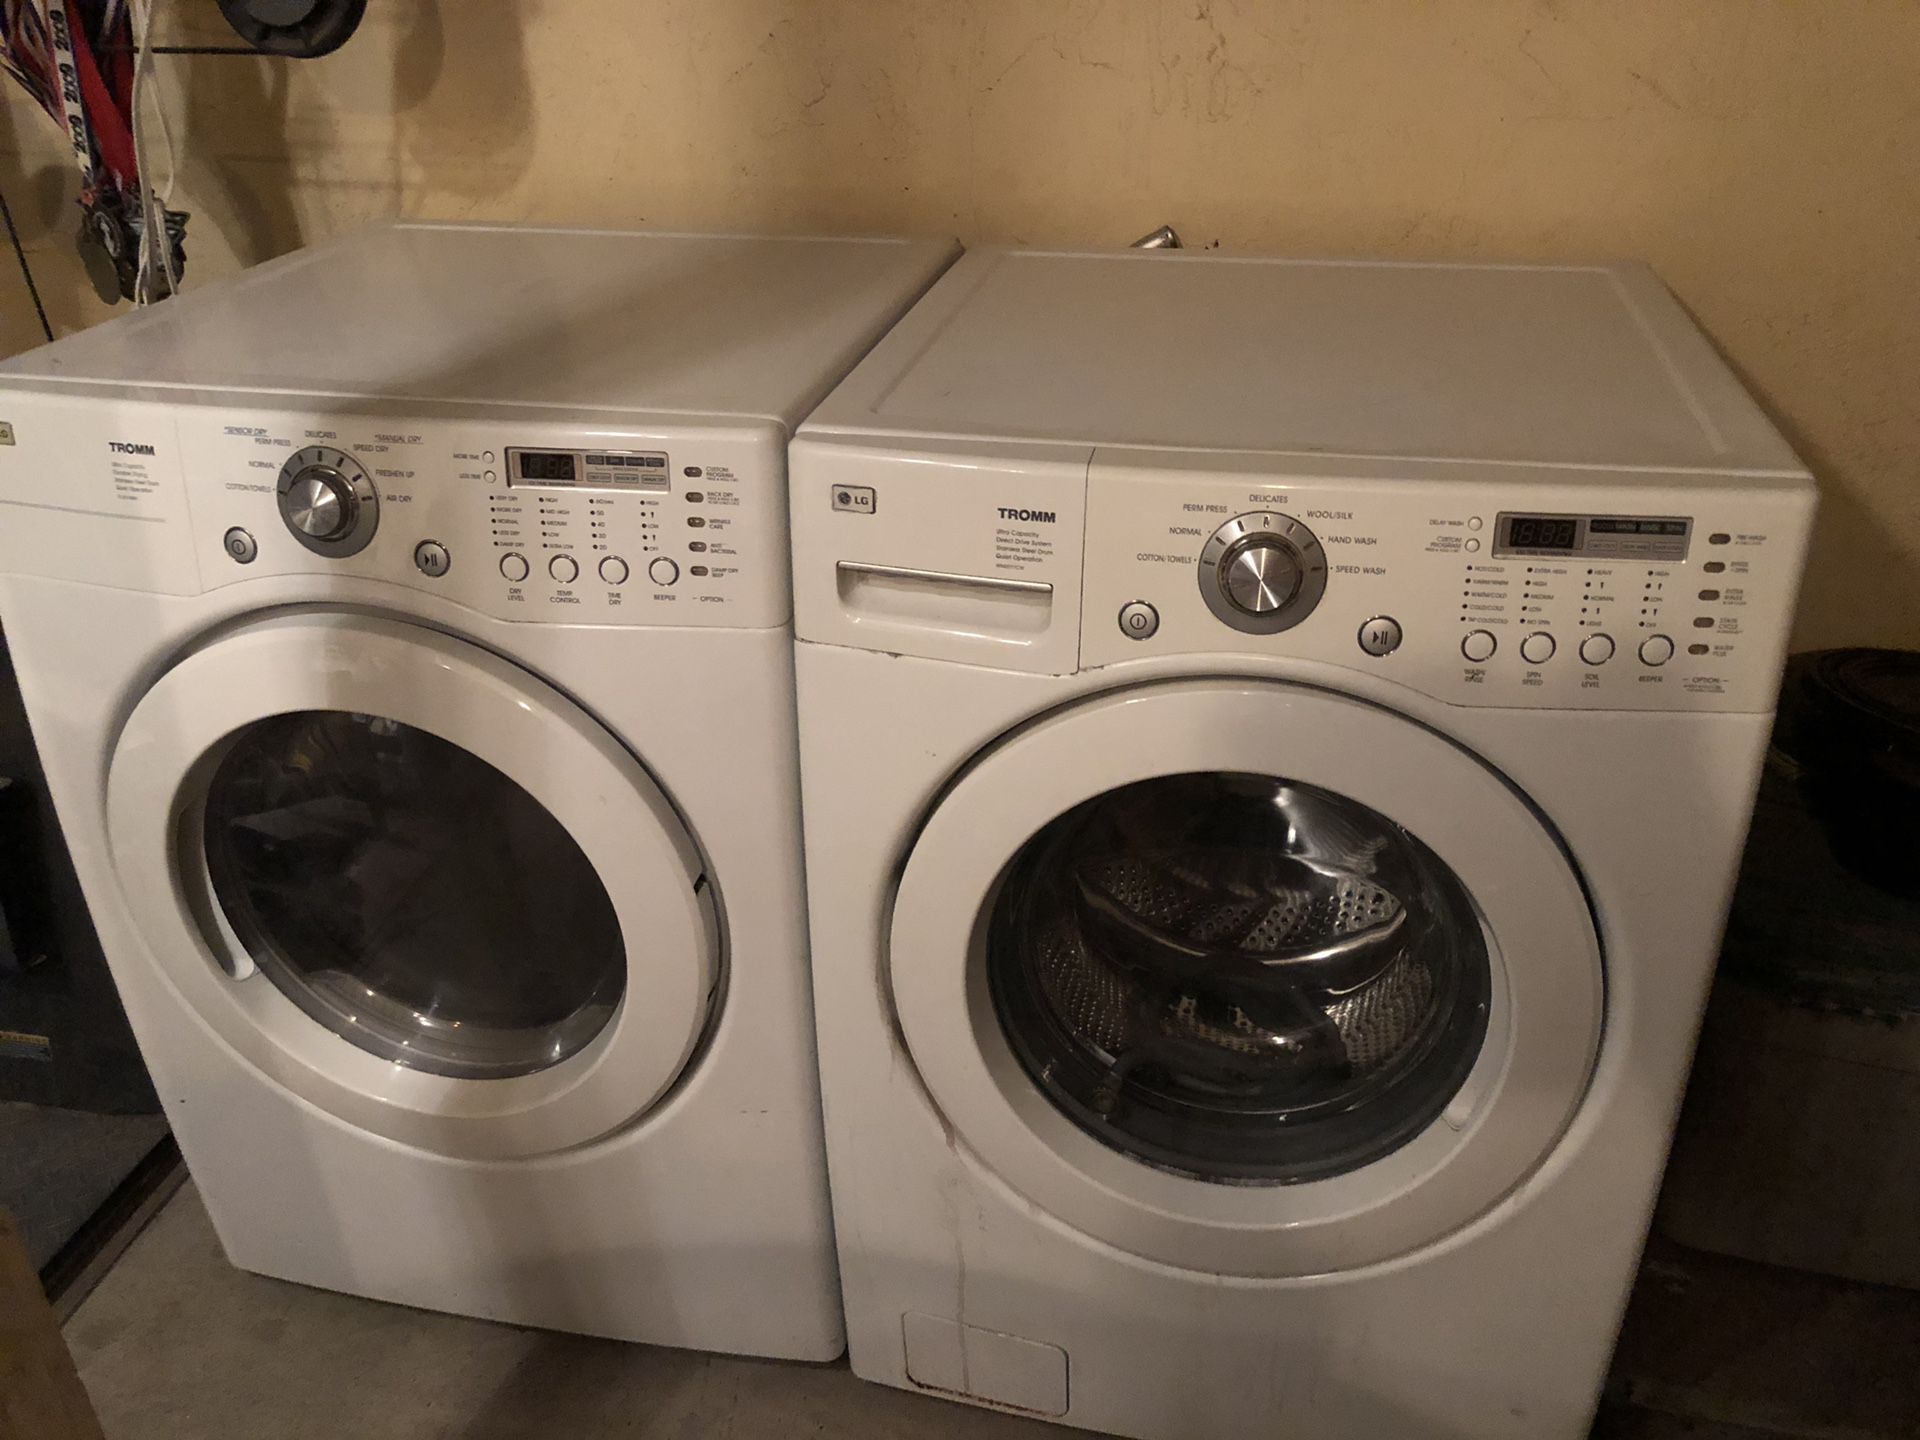 Washer & Dryer, Front Load. LG TROMM Brand, Ultra Capacity, Stainless Steel Drum, Model # WM2077CW